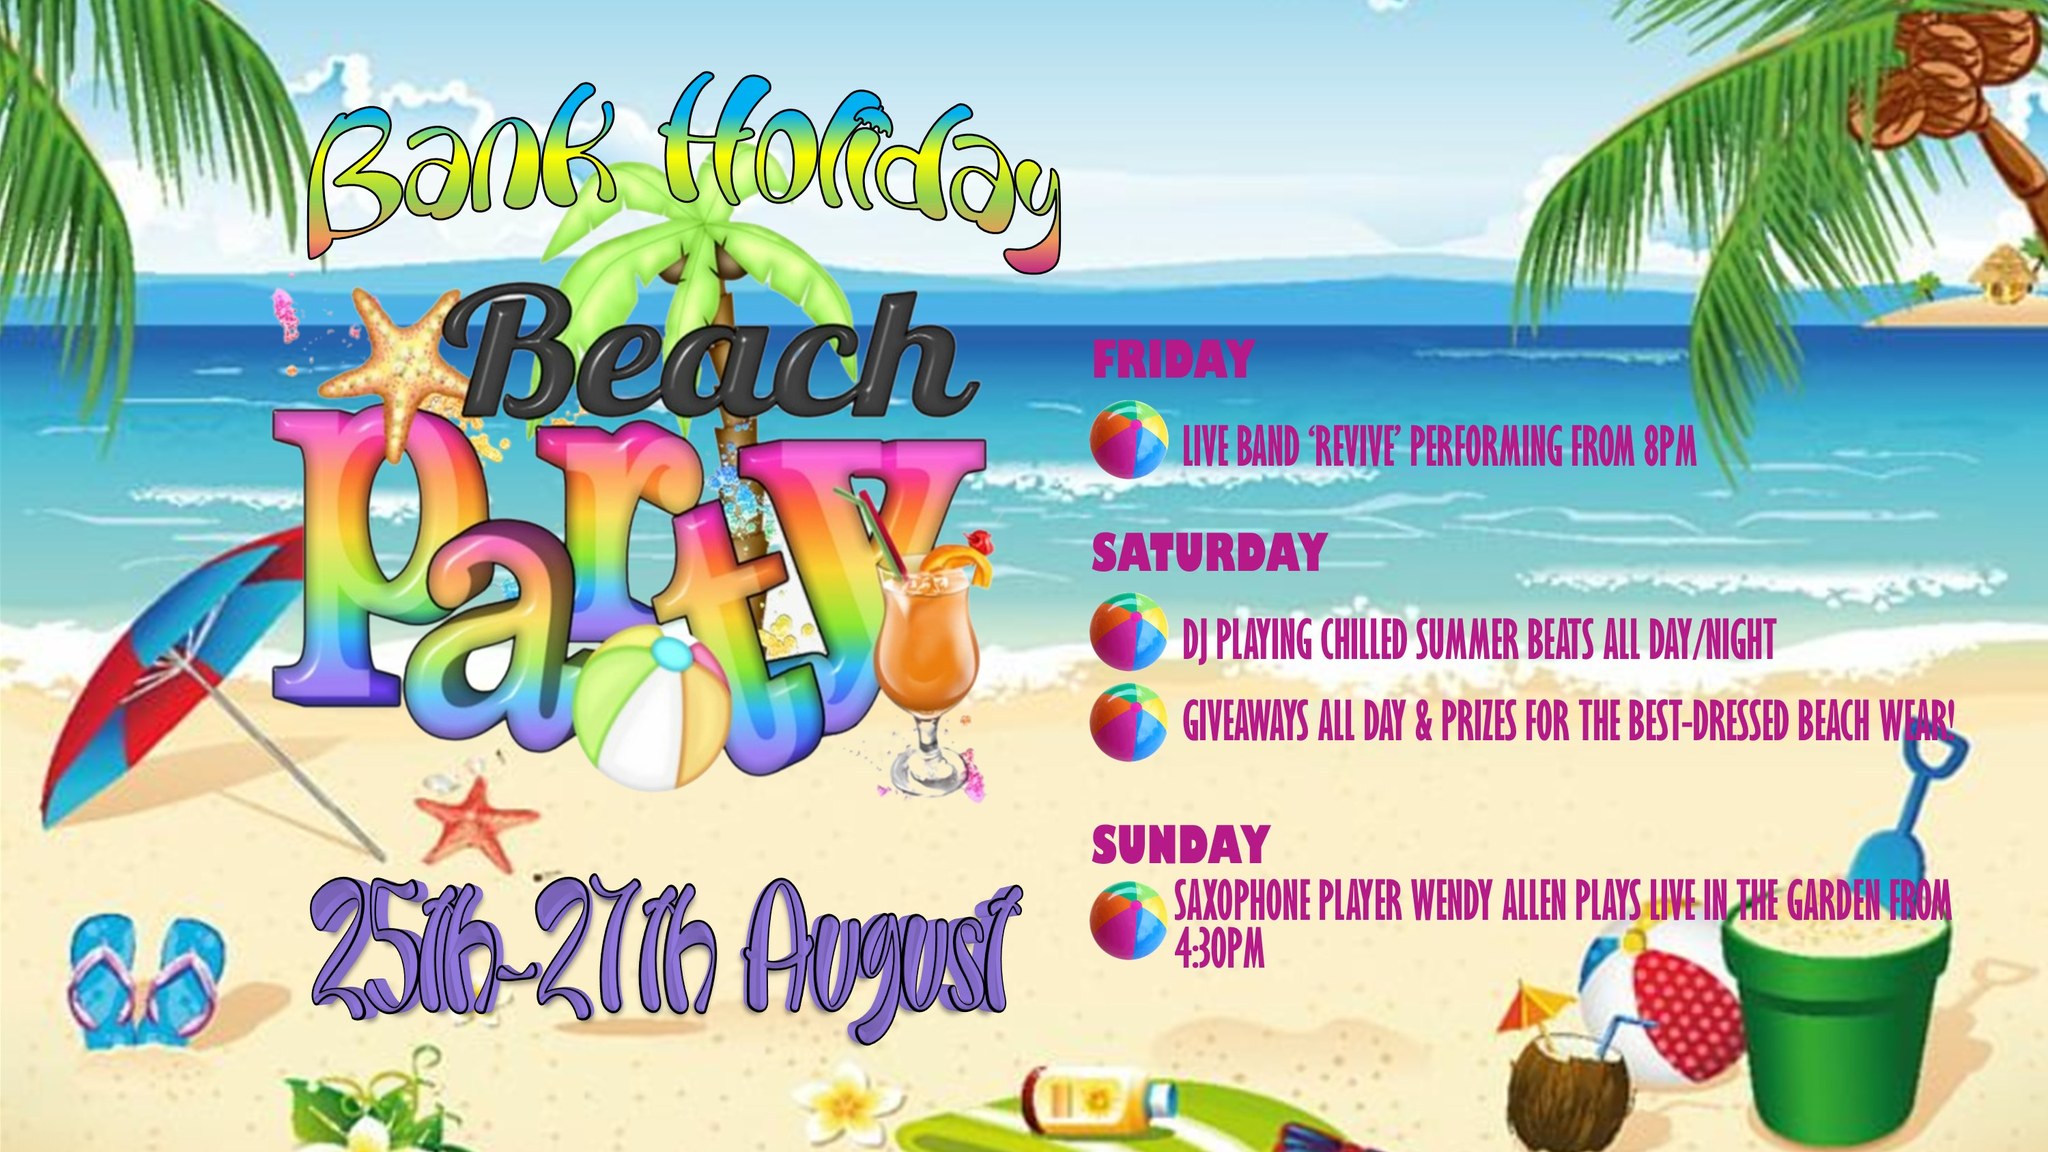 Bank Holiday Beach Party: sax player Wendy Allen